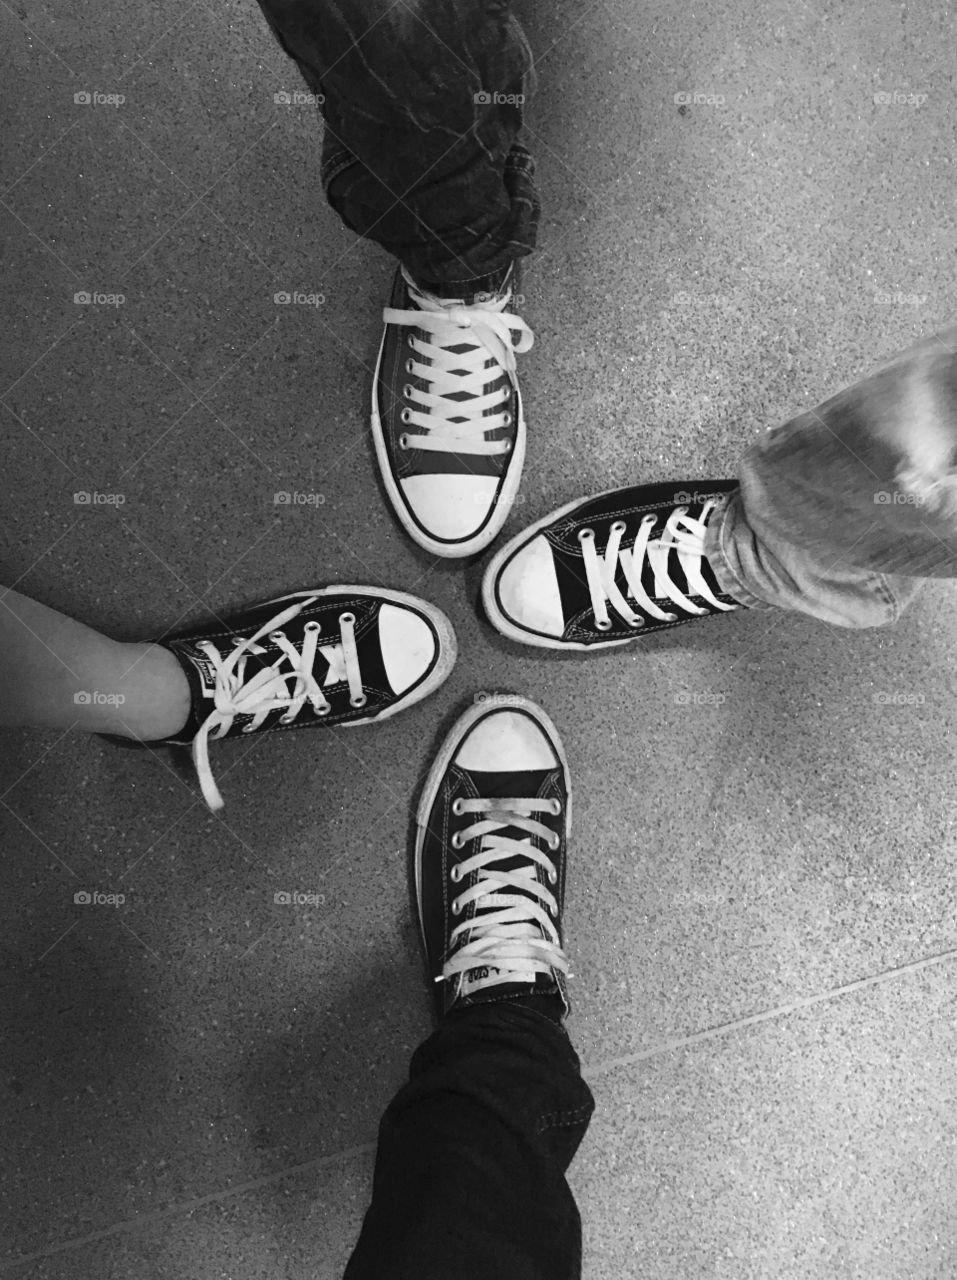 Four People Wearing Canvas Shoes